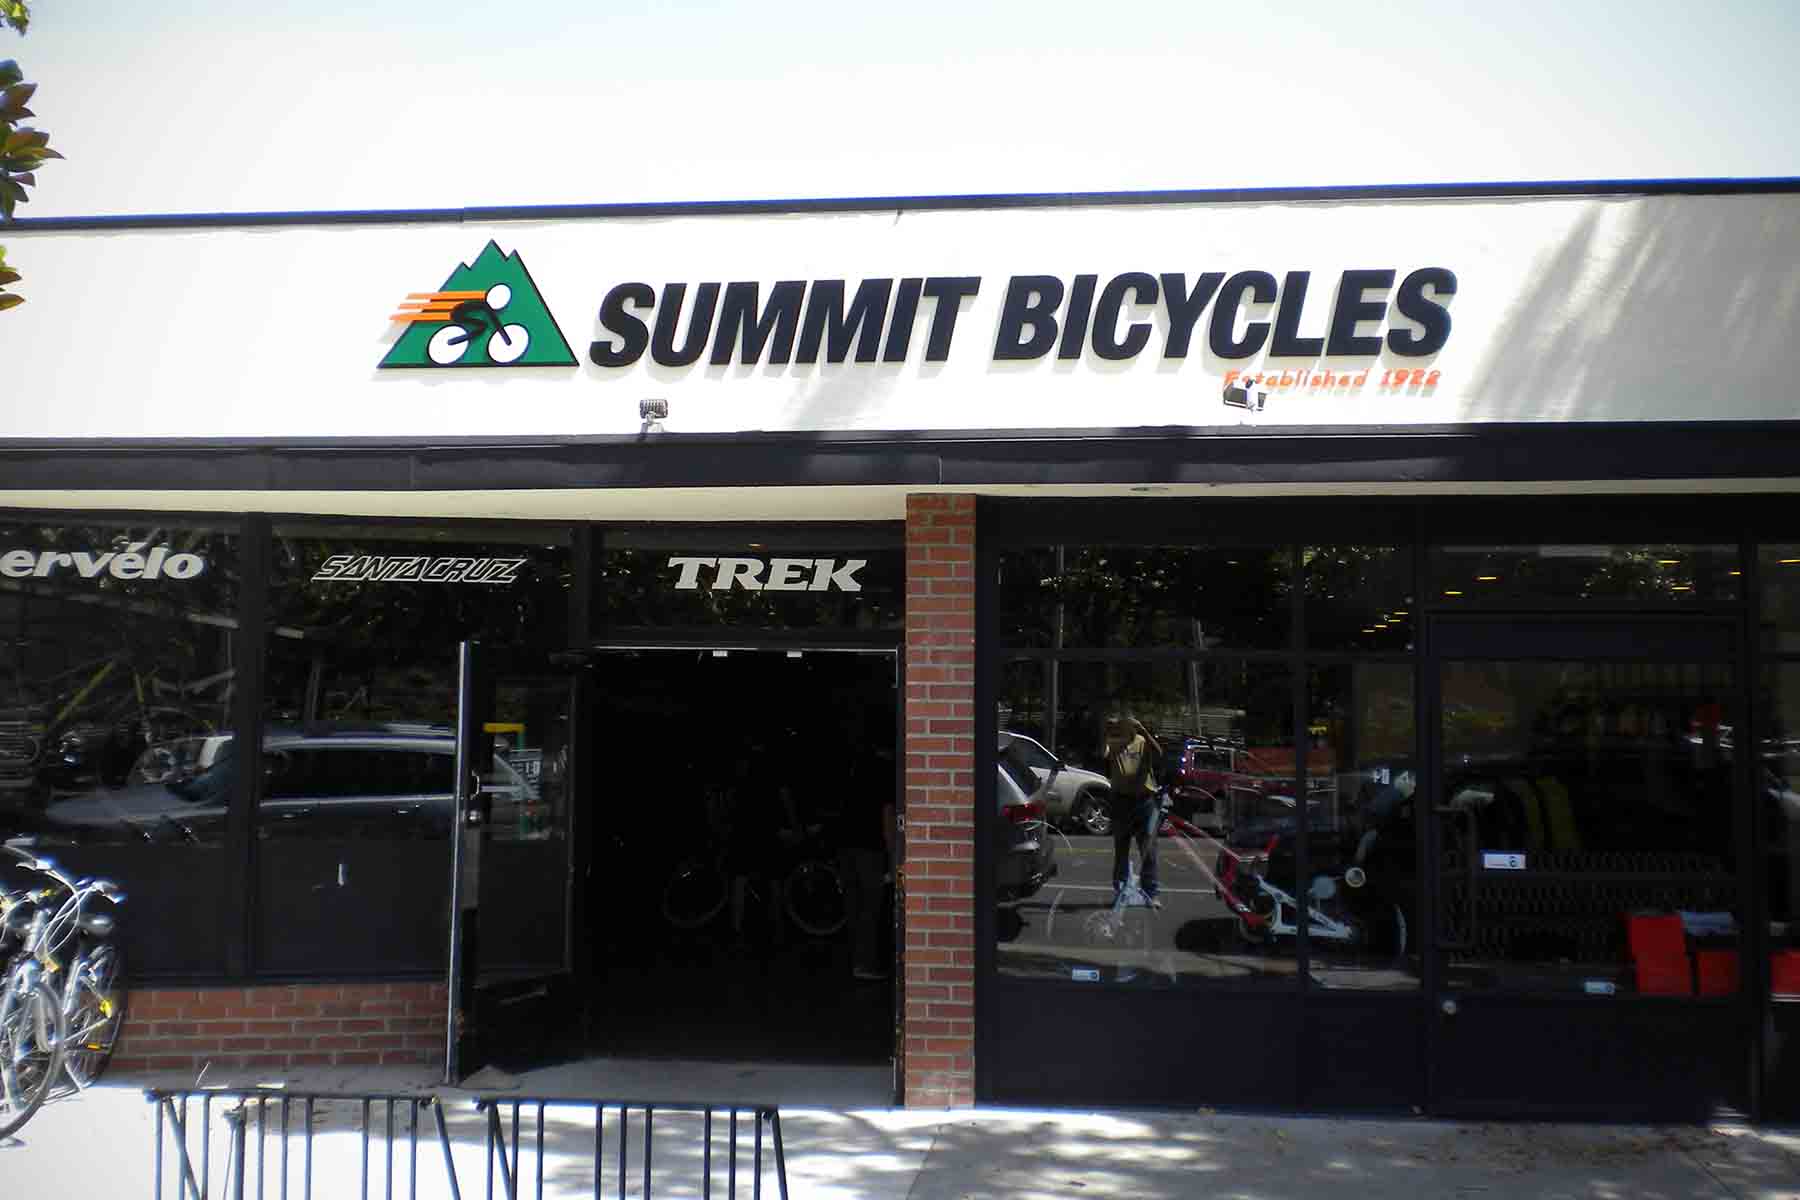 Summit Bicycles